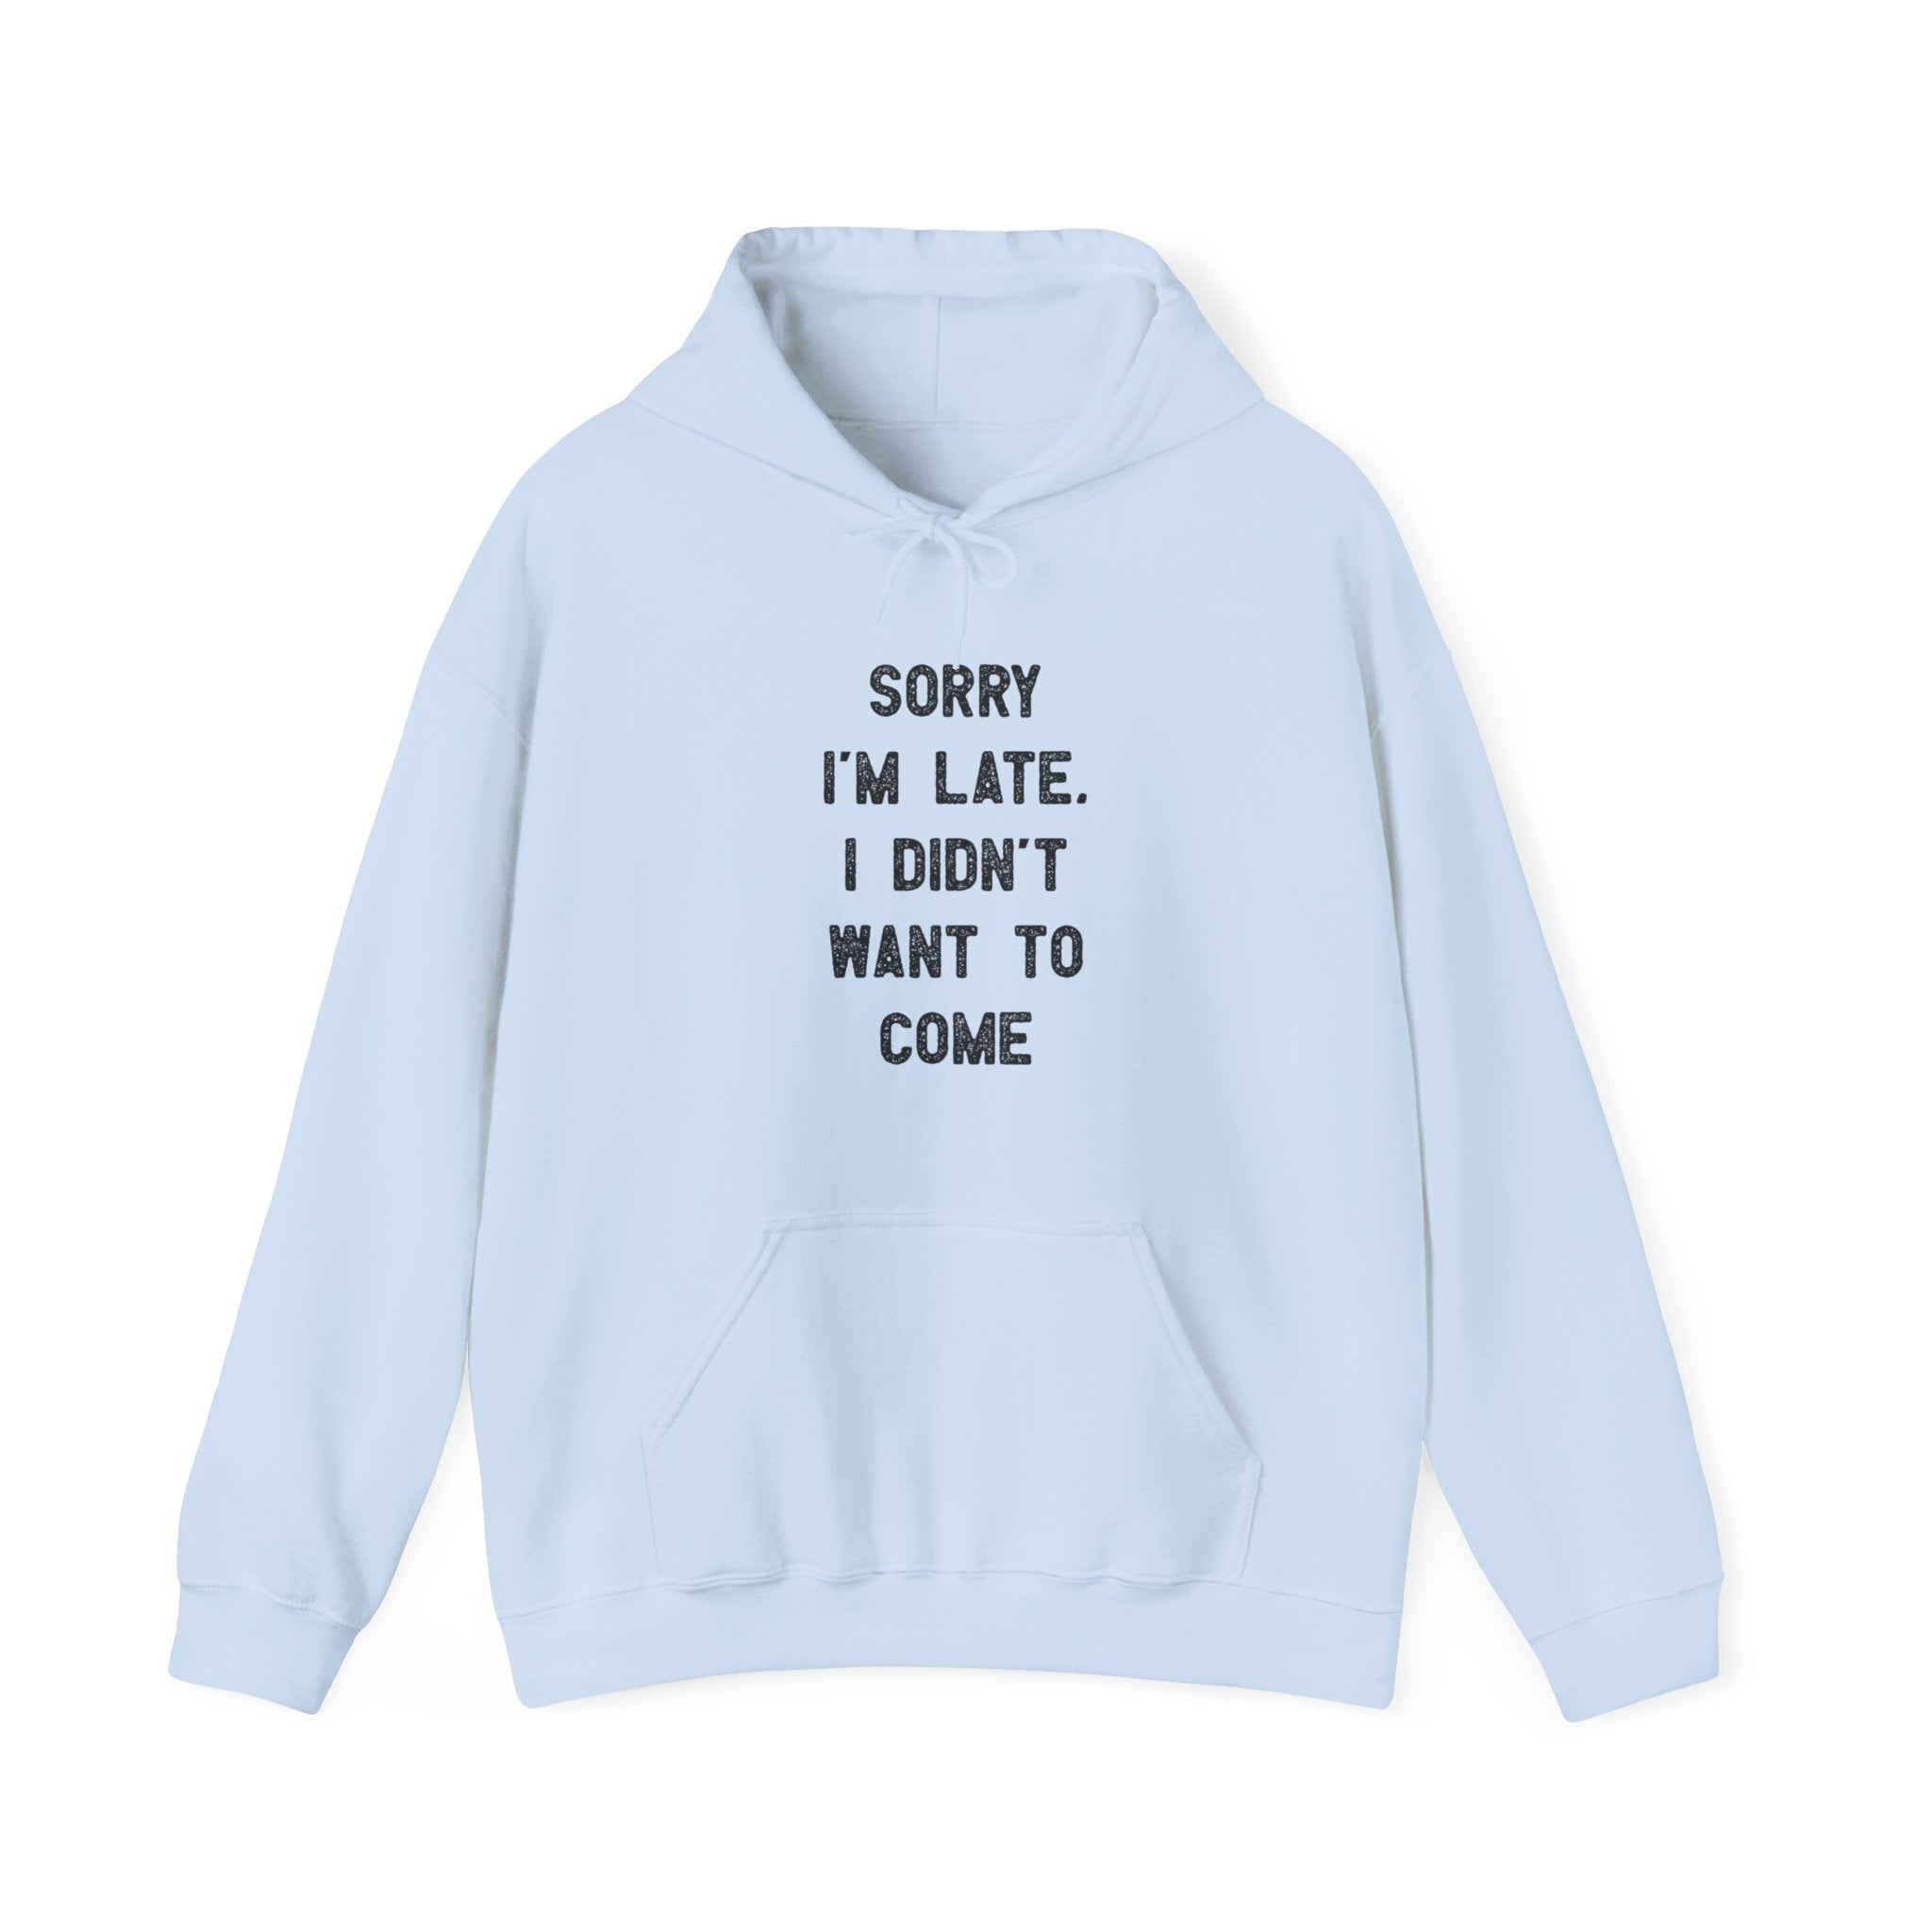 Sorry I'm Late I Didn't Want to Come - Hooded Sweatshirt